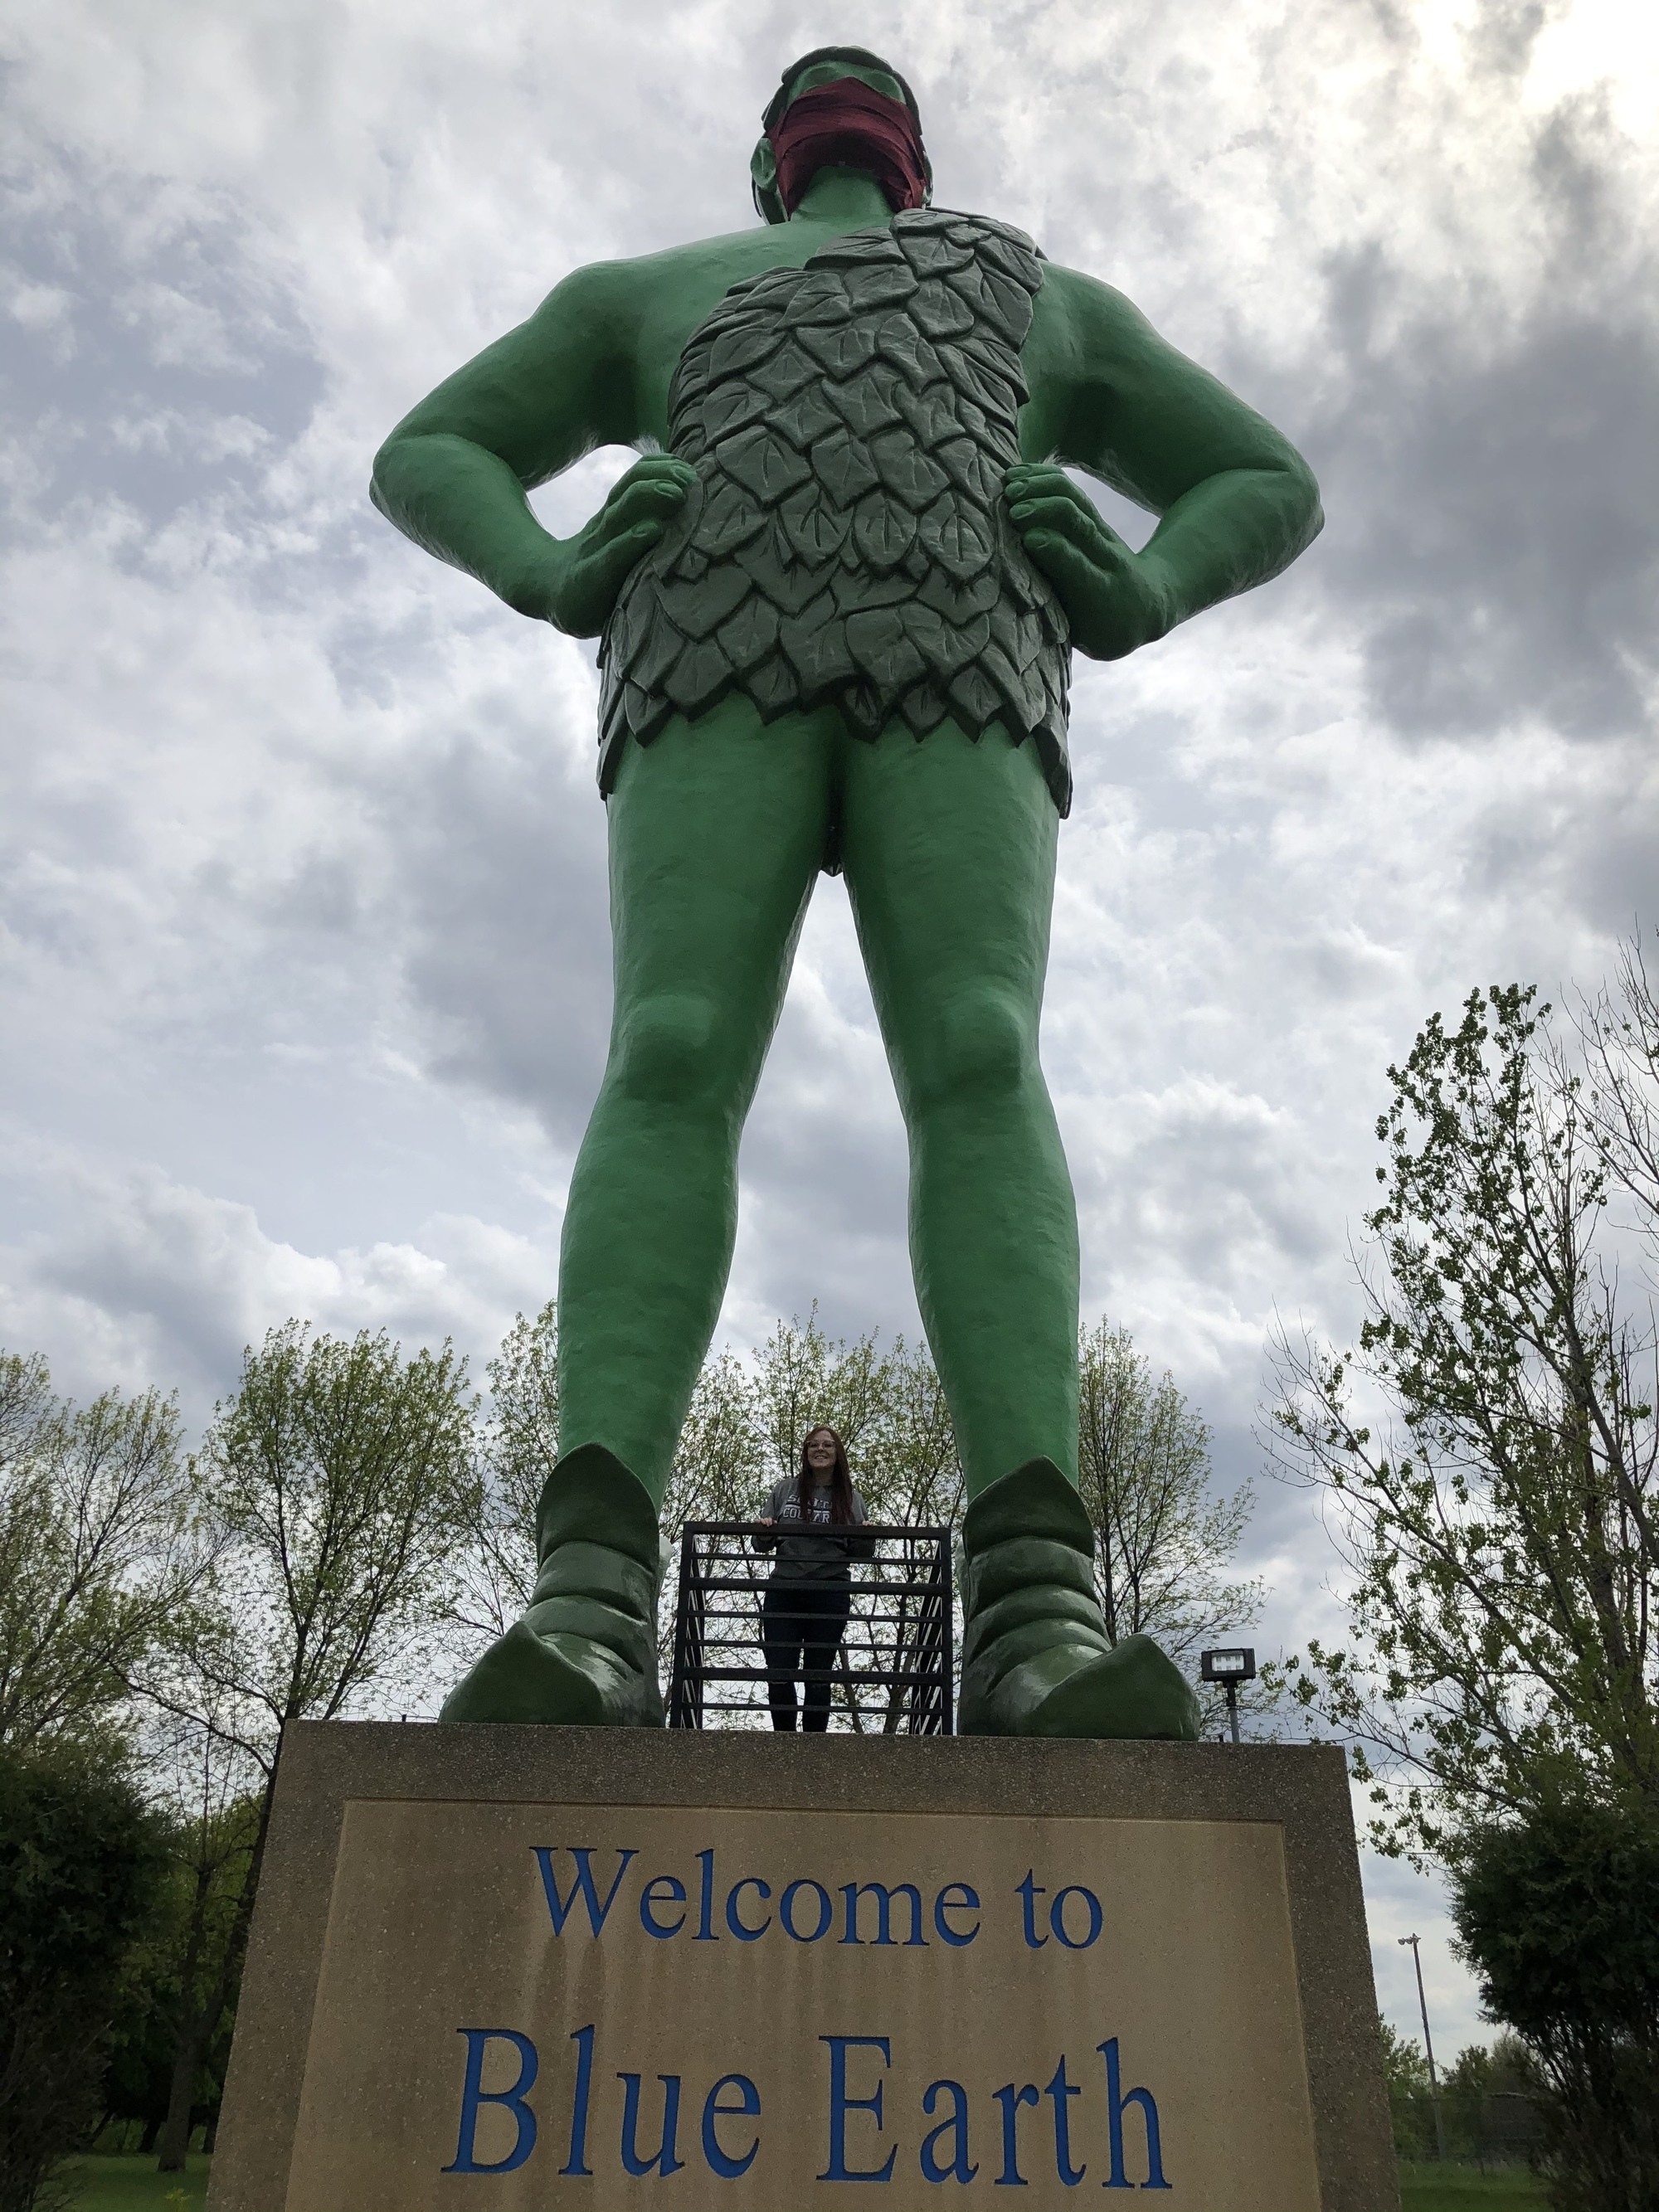 Jolly green giant statue